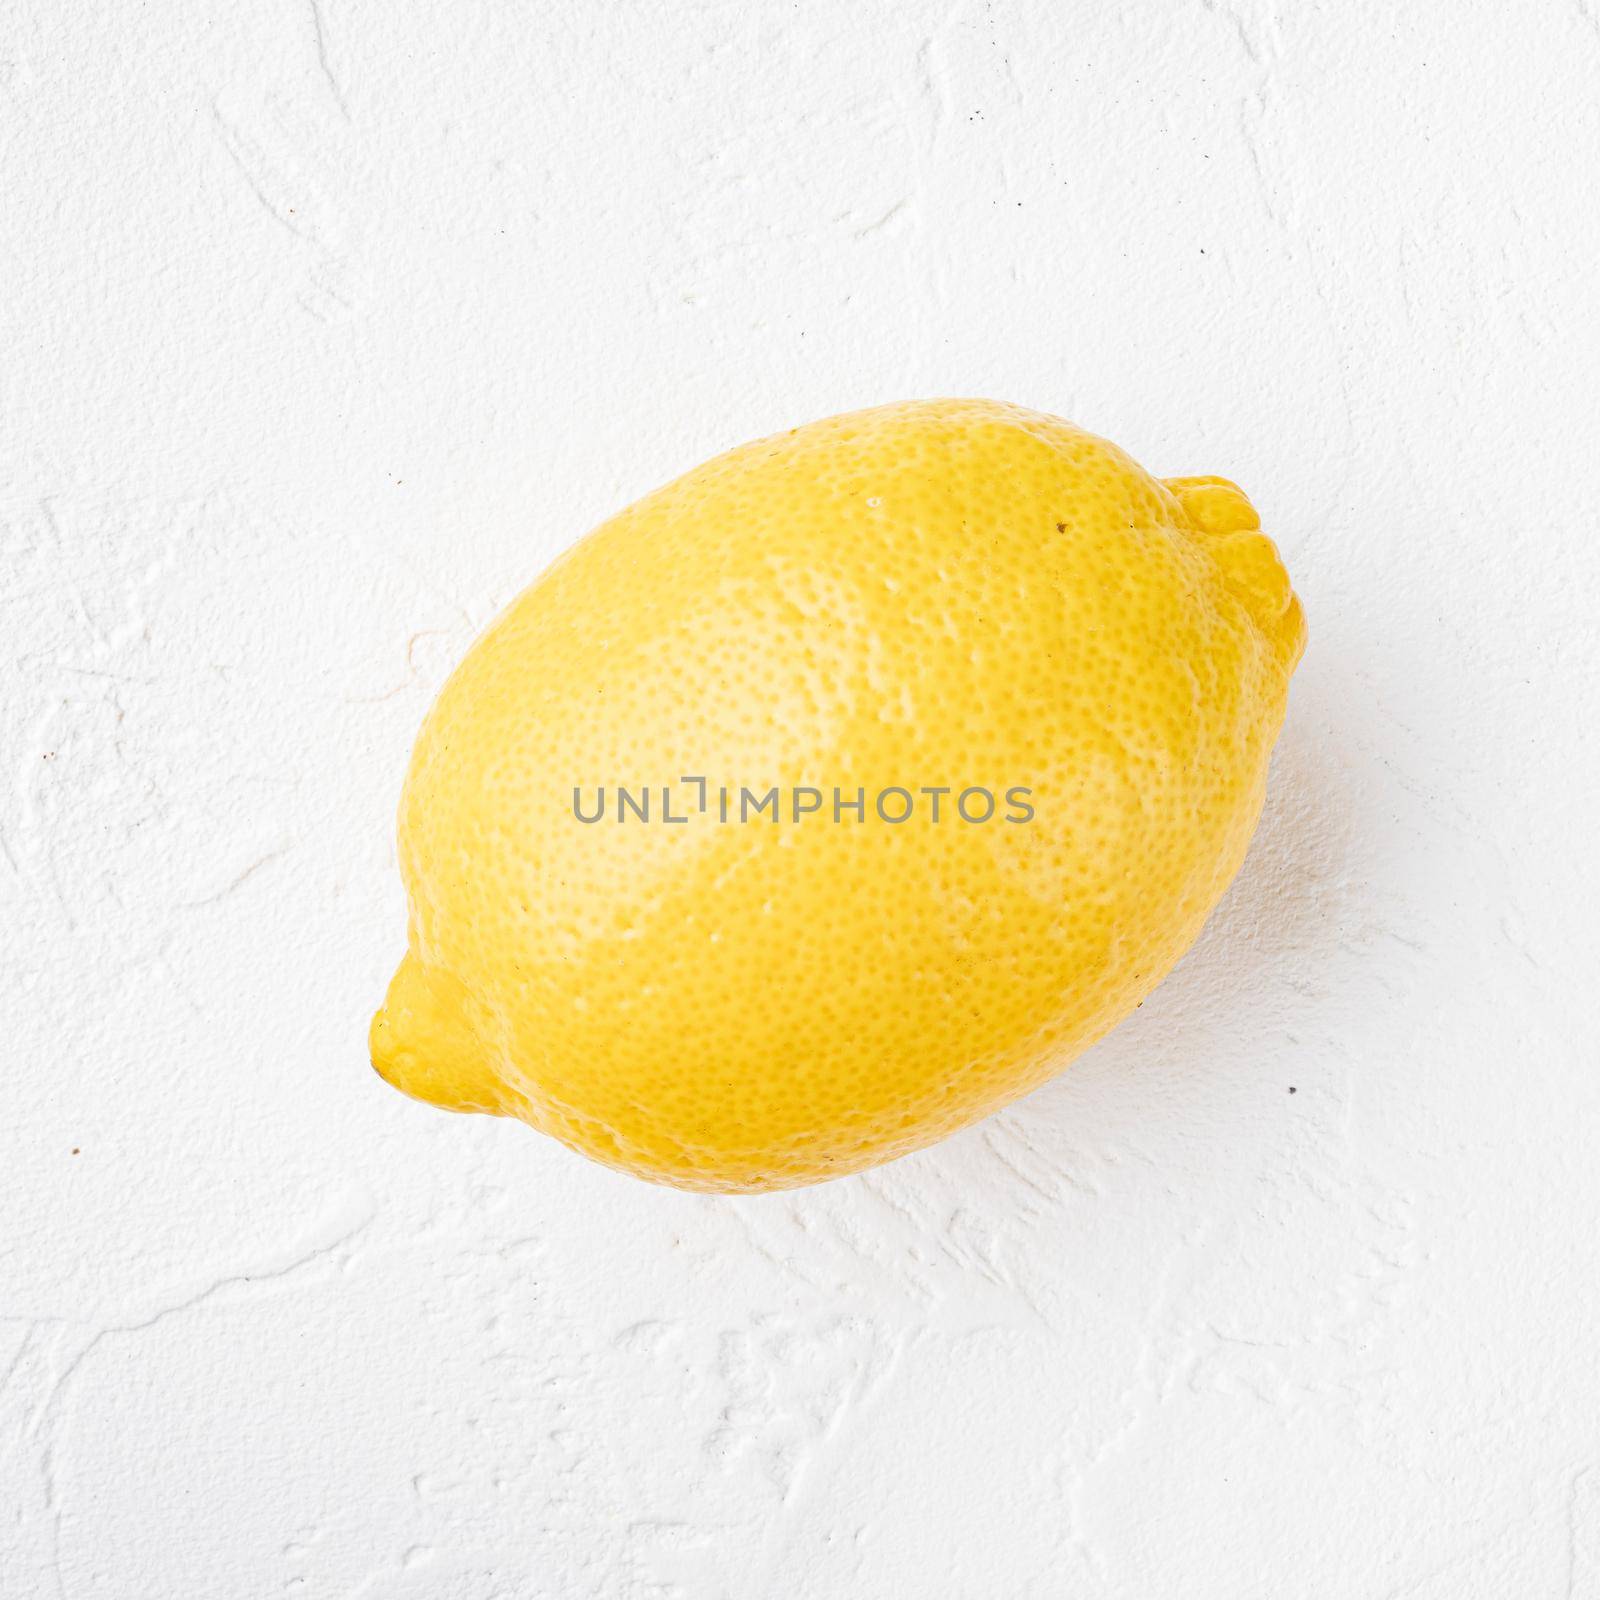 Yellow ripe lemon, on white stone table background, with copy space for text by Ilianesolenyi